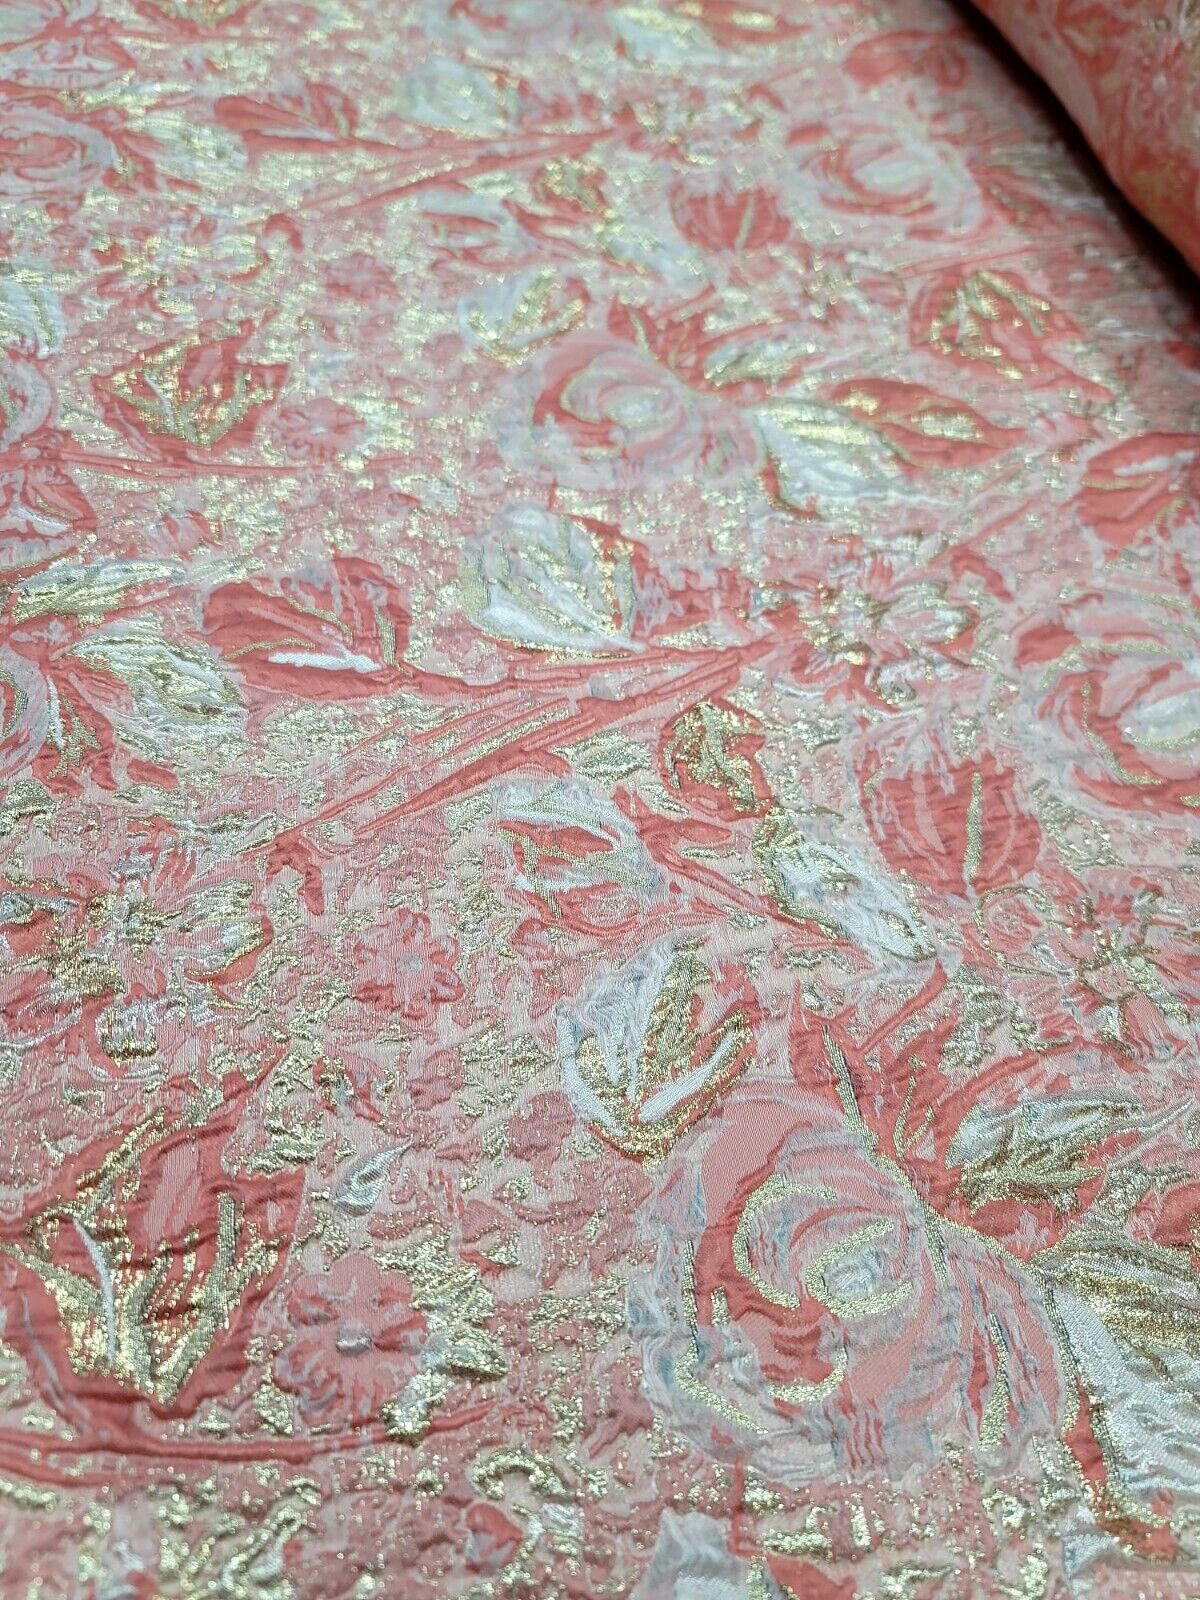 Coral Blush Metallic Gold Floral BROCADE FABRIC SOLD BY THE YARD For Dress